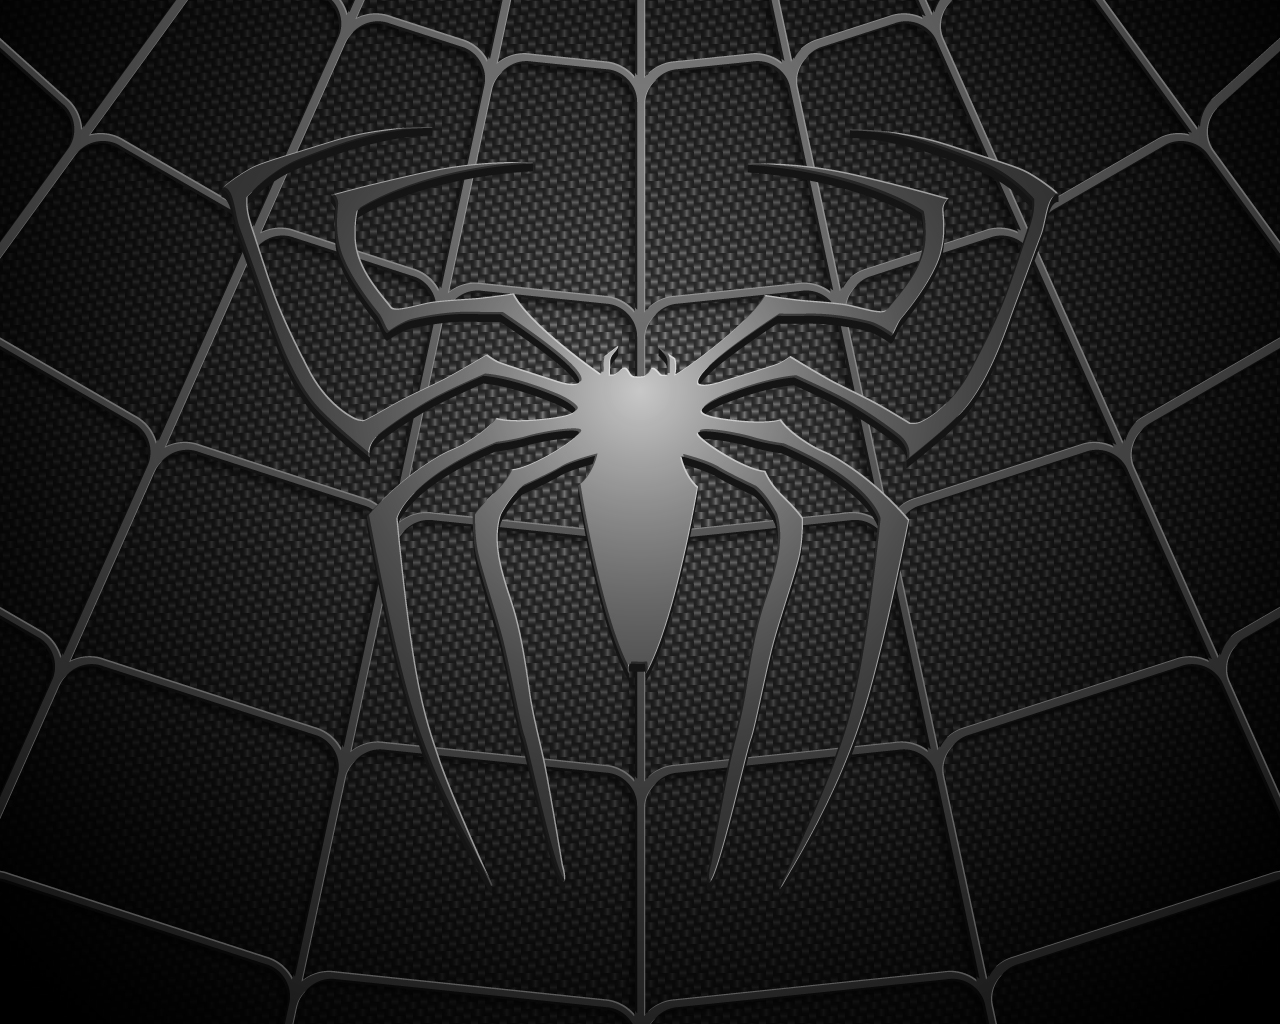 647 Spider Man HD Wallpapers Backgrounds - Wallpaper Abyss